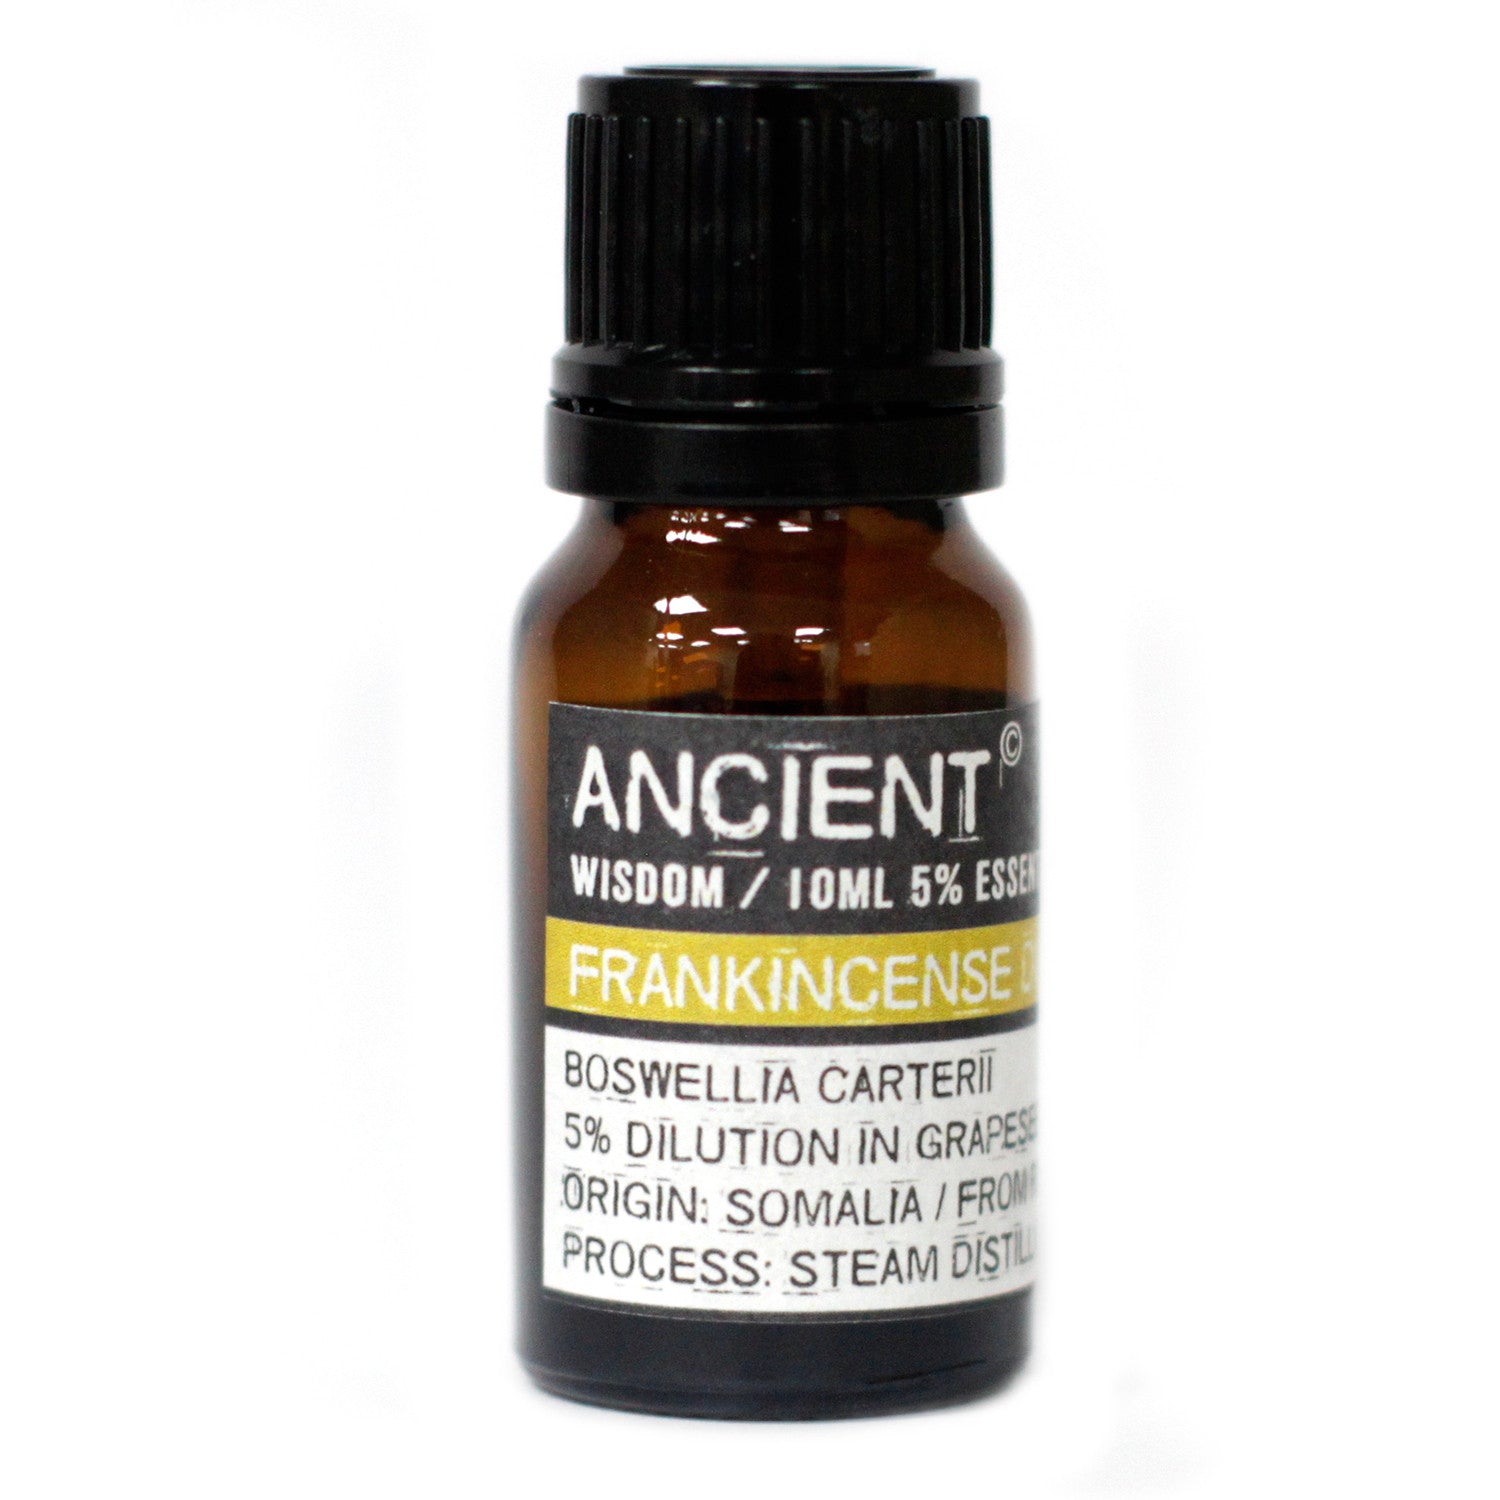 View 10 ml Frankincense D Essential Oil information